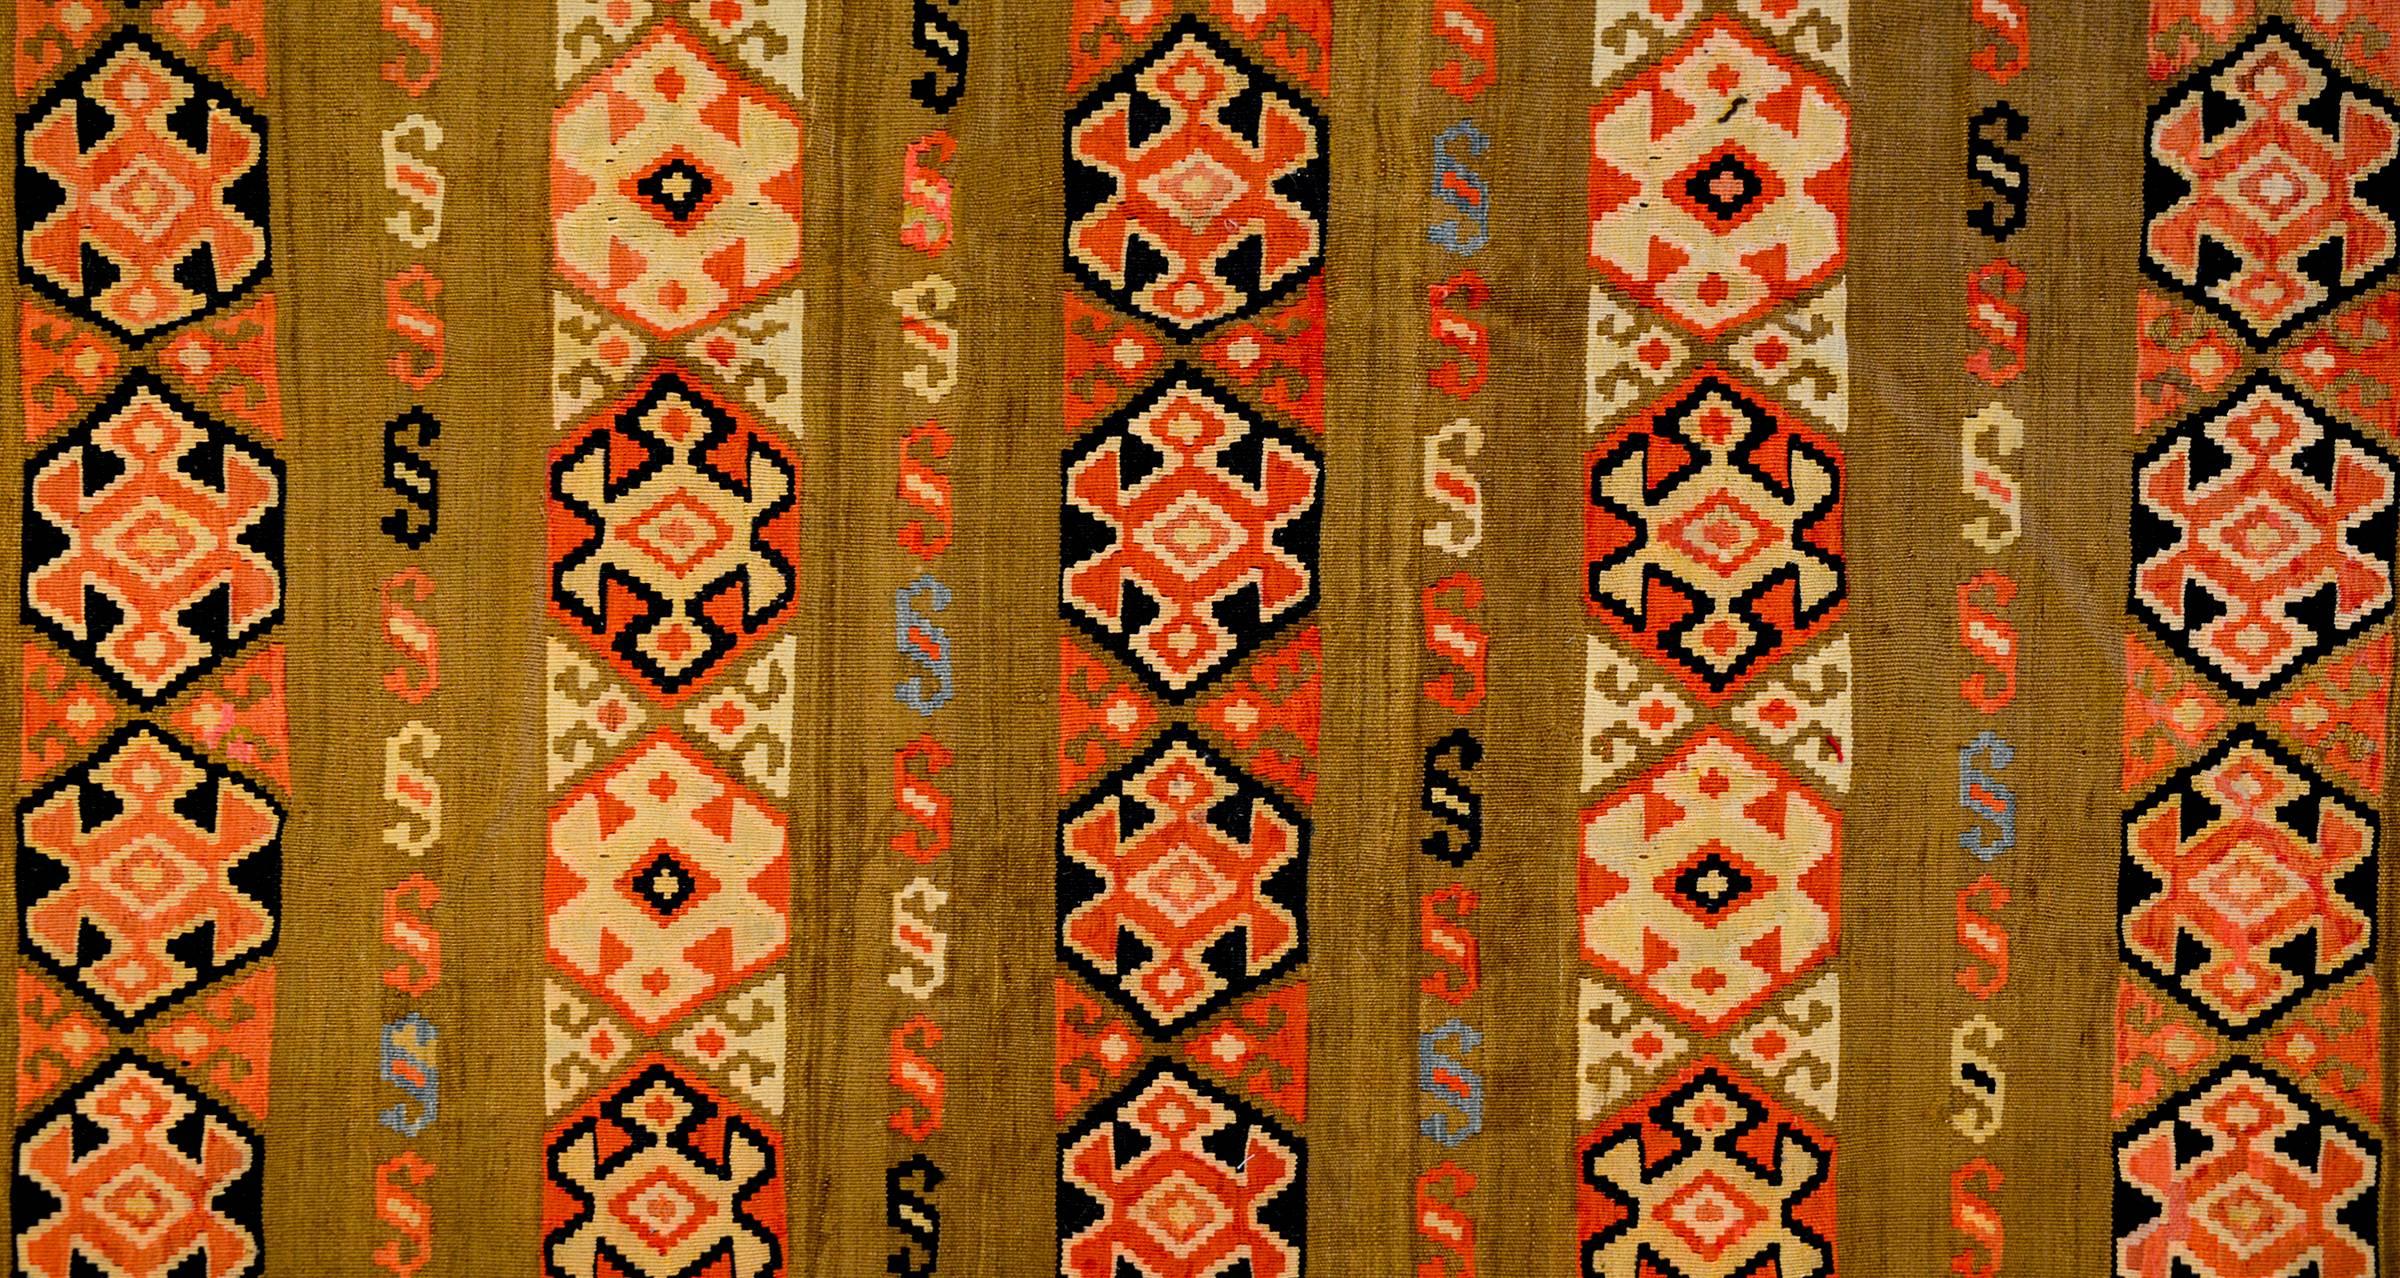 An incredible mid-20th century Persian Zarand Kilim runner with a beautiful pattern containing stripes of stylized geometric flowers alternating with 